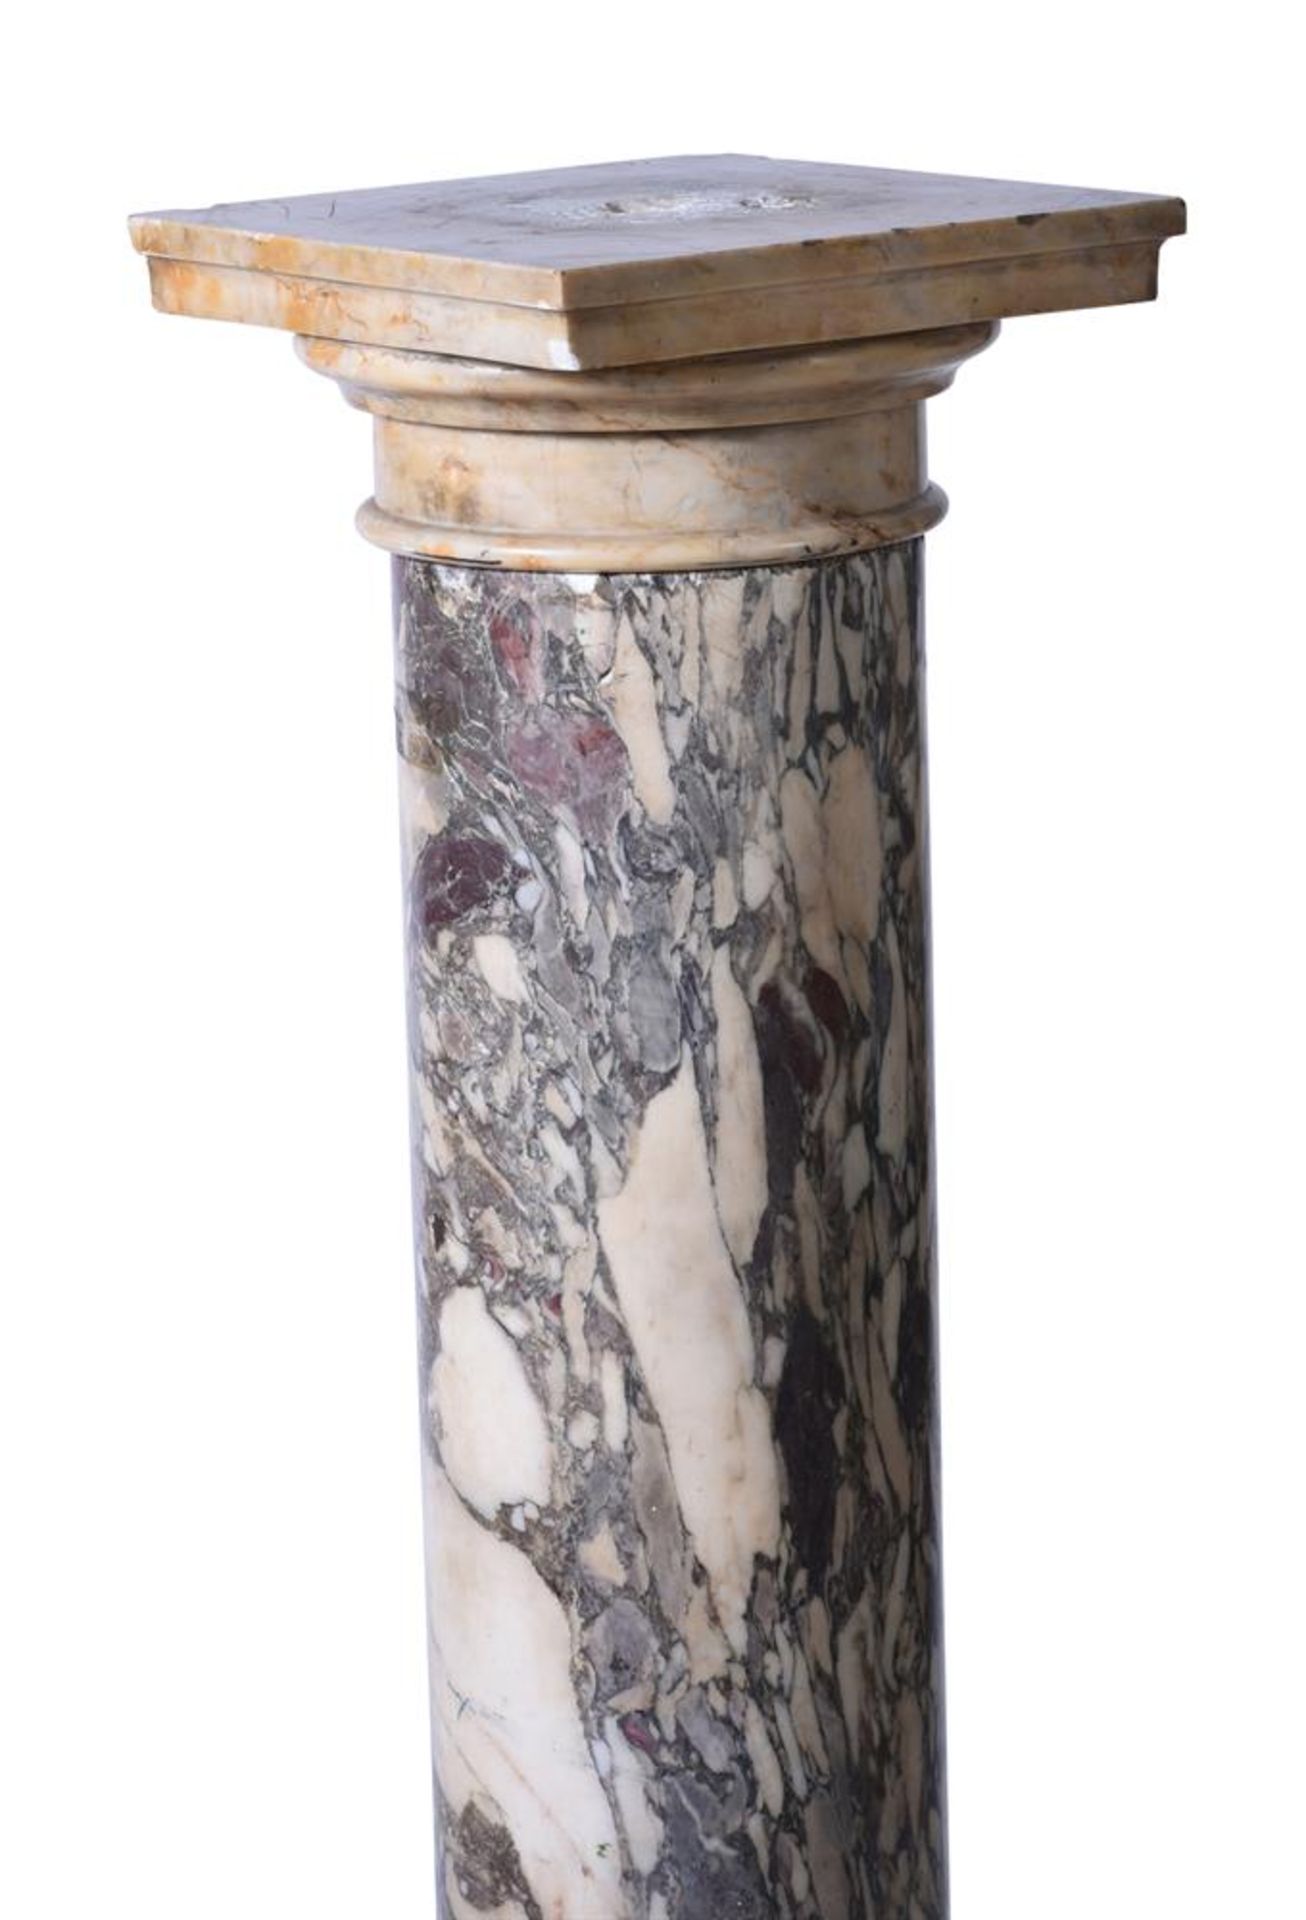 AN ITALIAN BRECCIA AFRICANA MARBLE PEDESTAL, 18TH/19TH CENTURY - Image 2 of 3